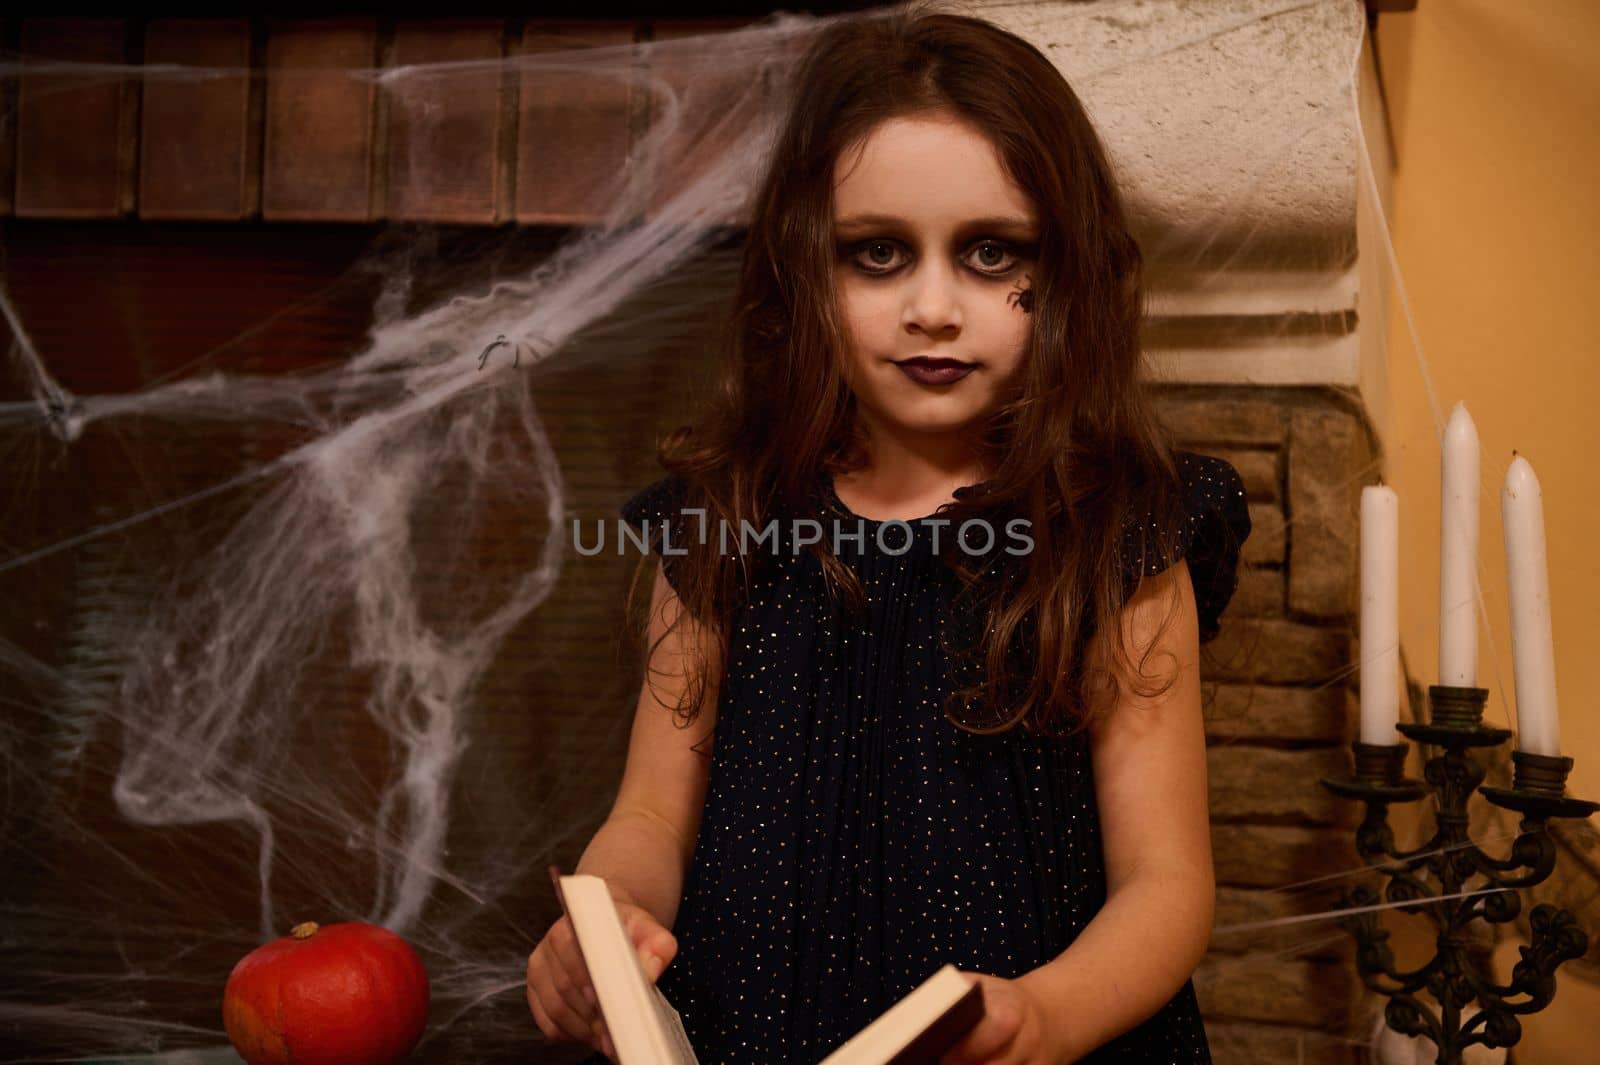 Pretty child, little girl sorceress, witch, enchantress with a spell book against a cobweb-covered fireplace. Halloween by artgf